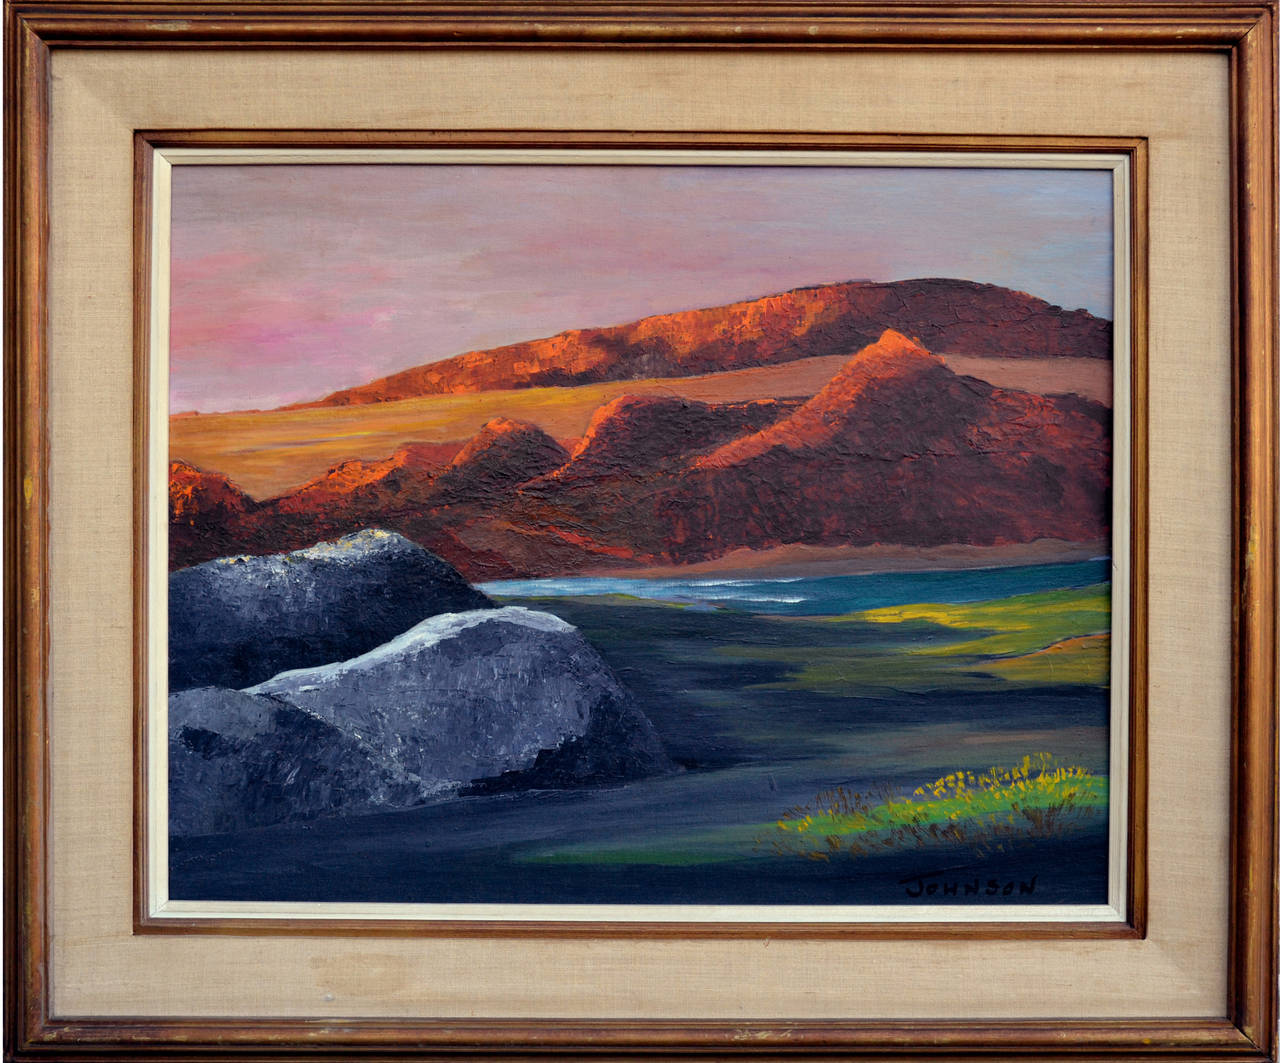 Midcentury oil painting of Baja, California, circa 1960. Signed lower right corner "Johnson." Displayed in a rustic wood frame. Image, 23"H x 29"W.